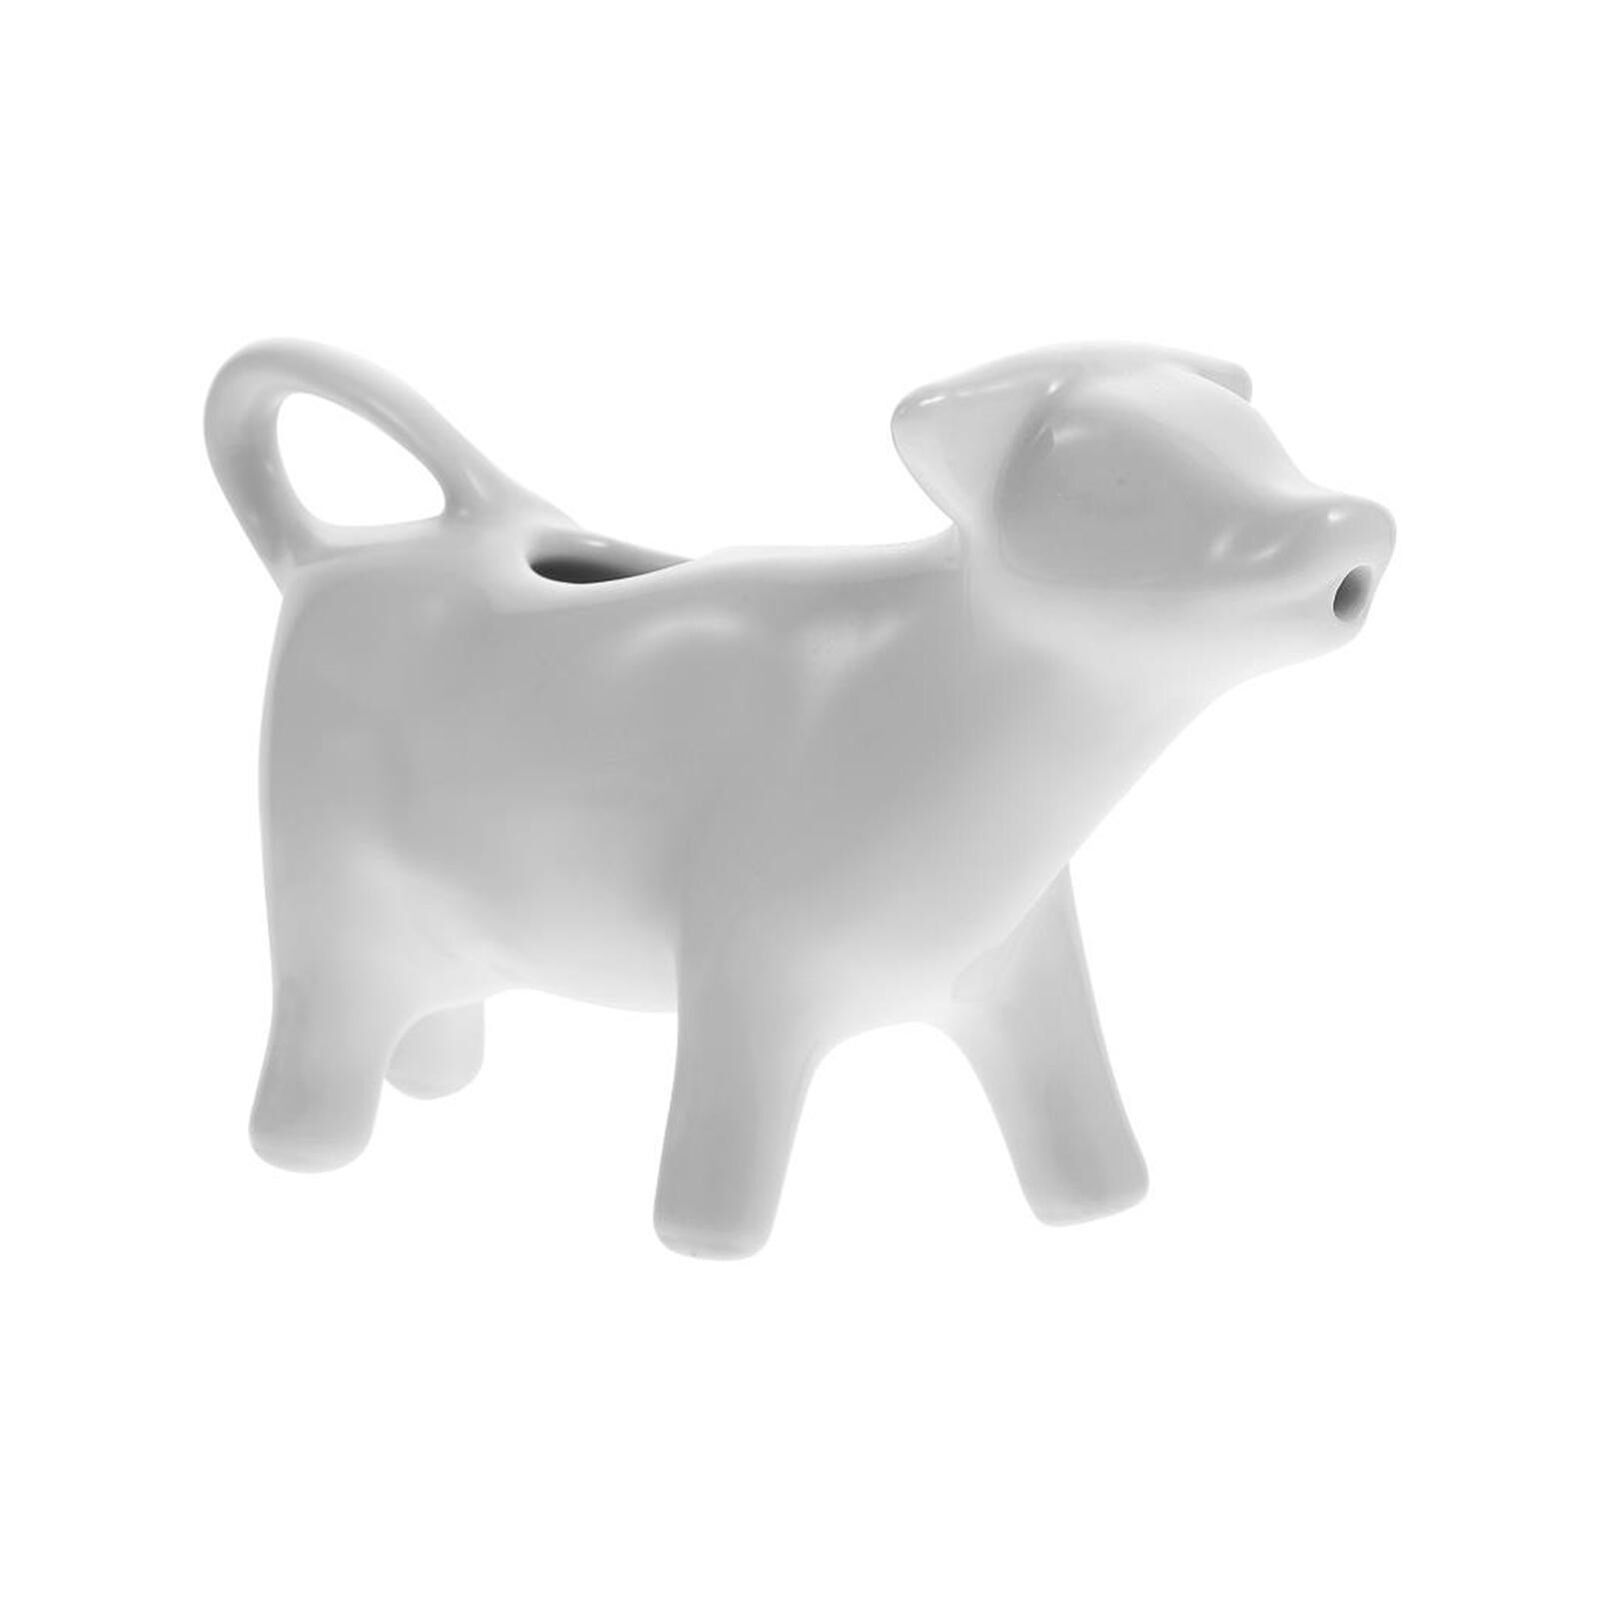 New White Ceramic Cow Creamer Pitcher Cartoon Cow Syrup Container Heat Resistant